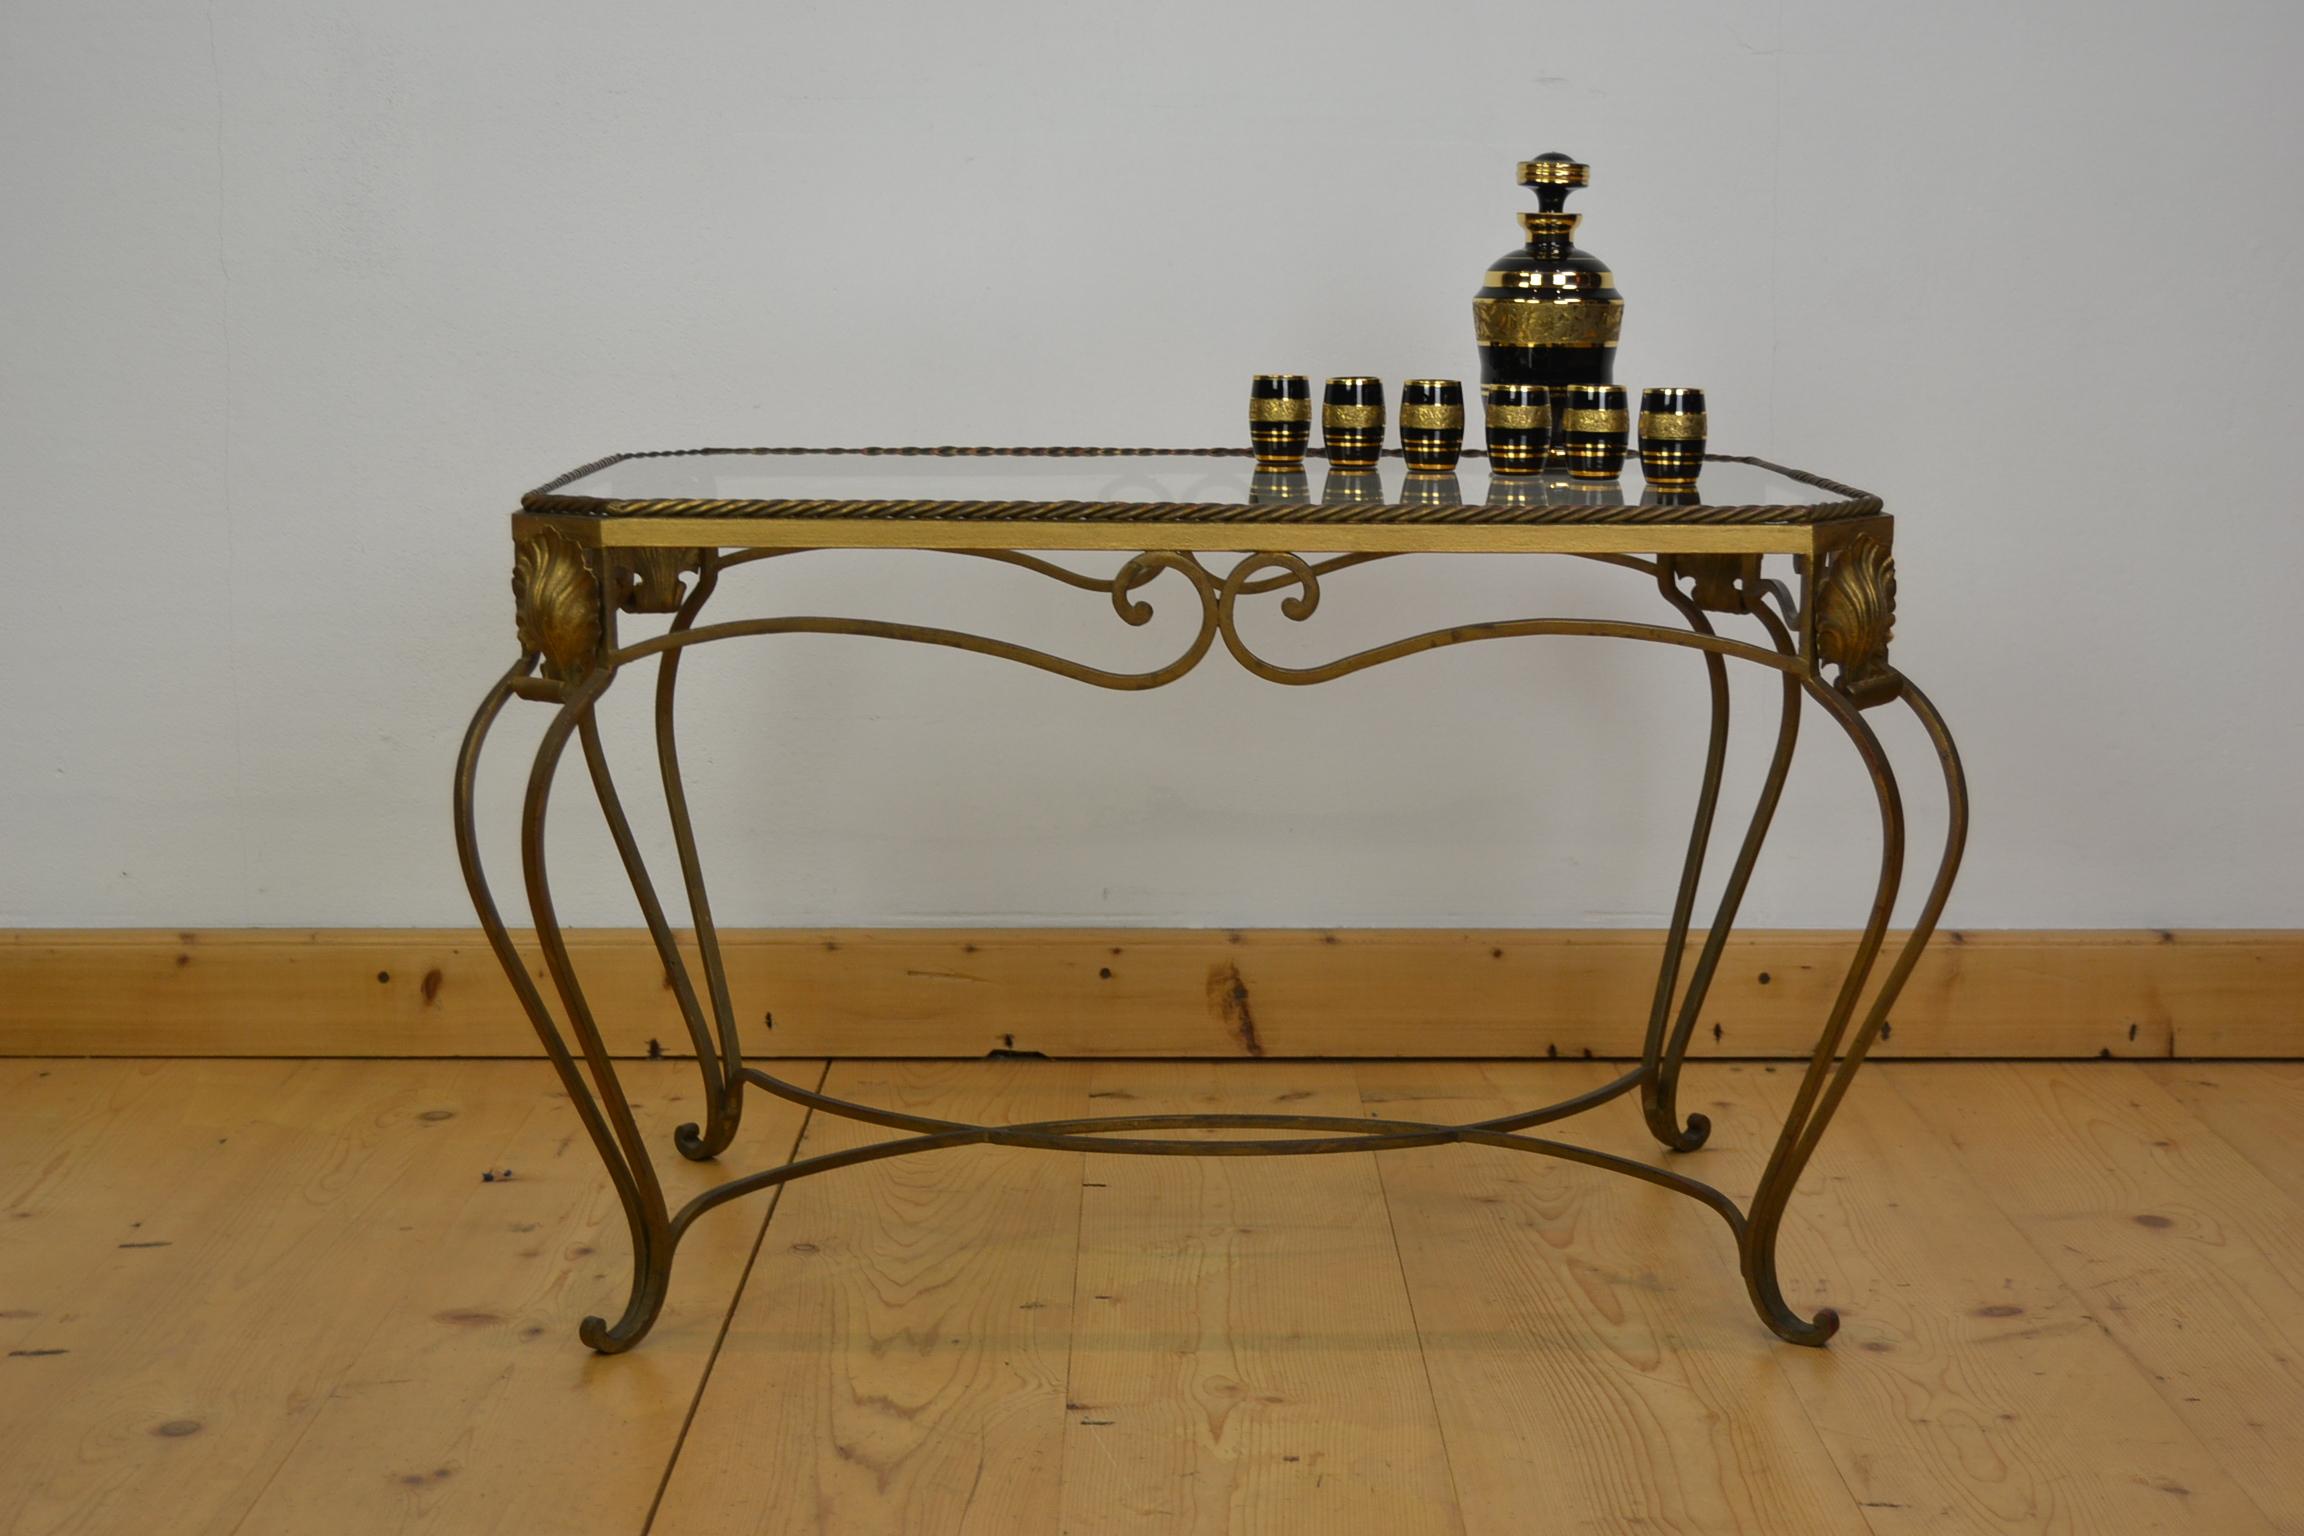 French gilt metal coffee table or side table.
A stylish table with ropes around the octagonal glass table top and shells or leaves on the corners. The bowed legs and the curling details make this side table very elegant.
Glass table top does have